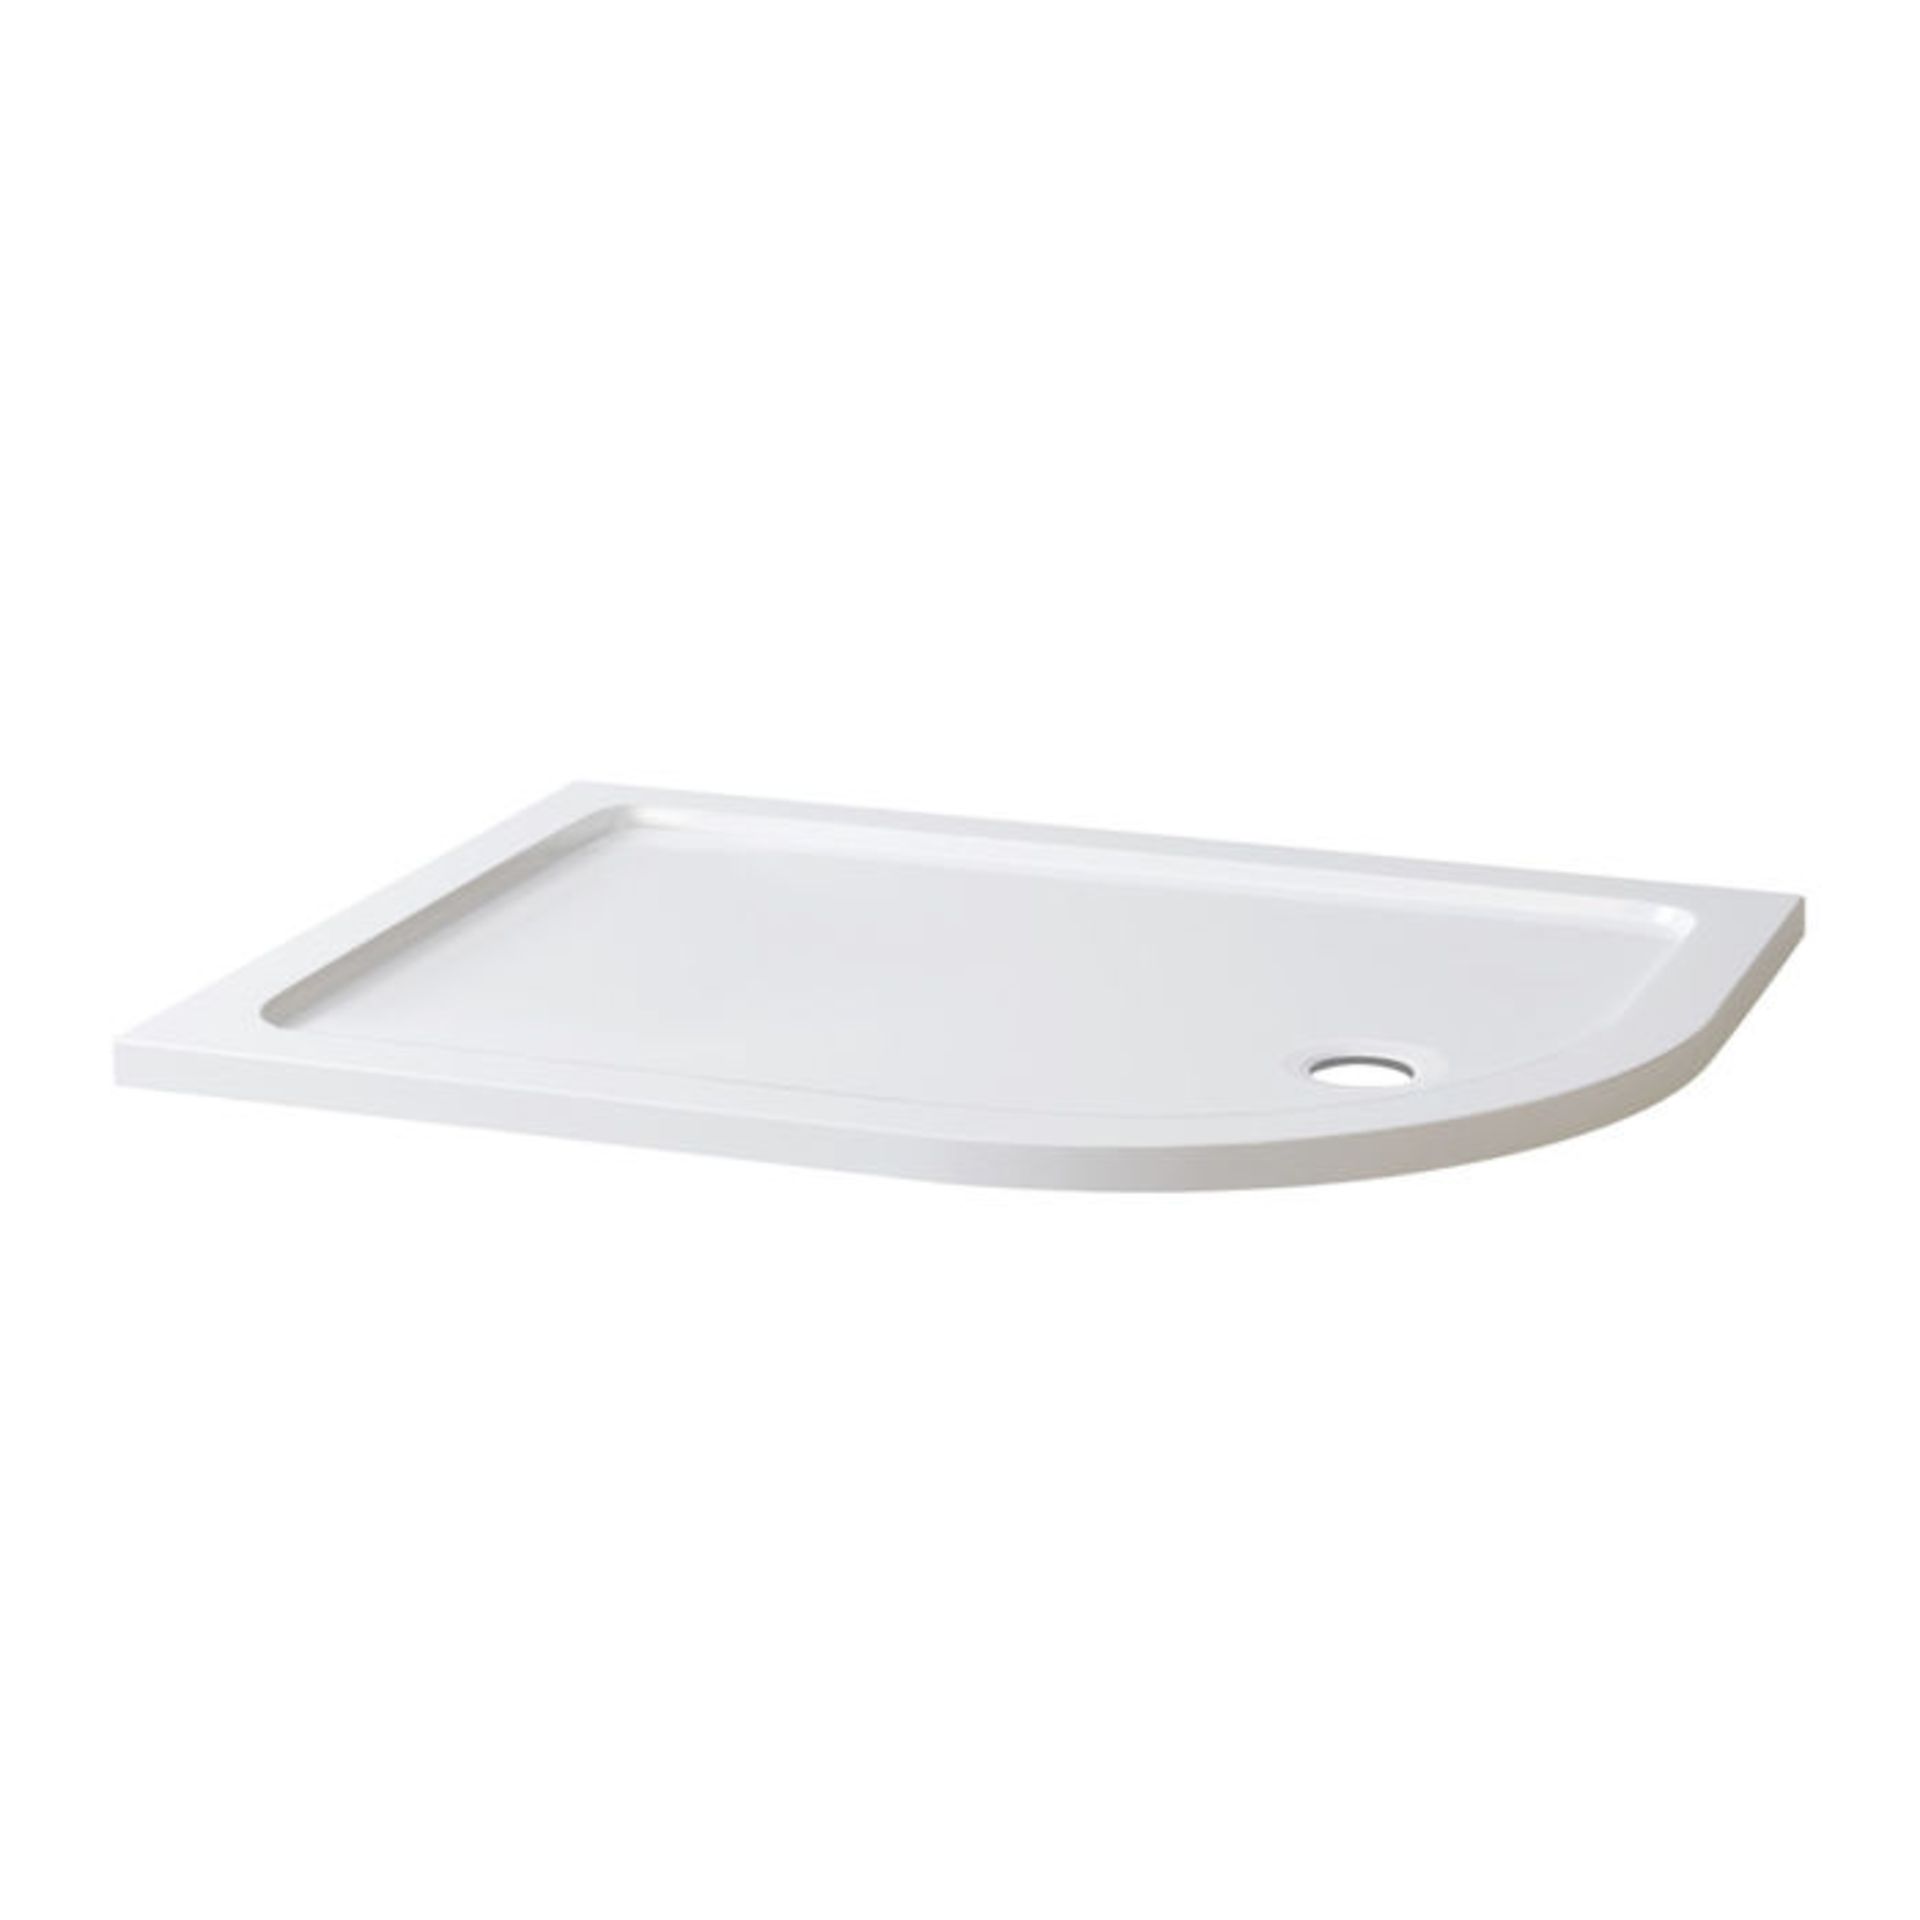 (AD91) 1200x900mm Offset Quadrant Ultra Slim Stone Shower Tray - Right. Low profile ultra slim - Image 2 of 2